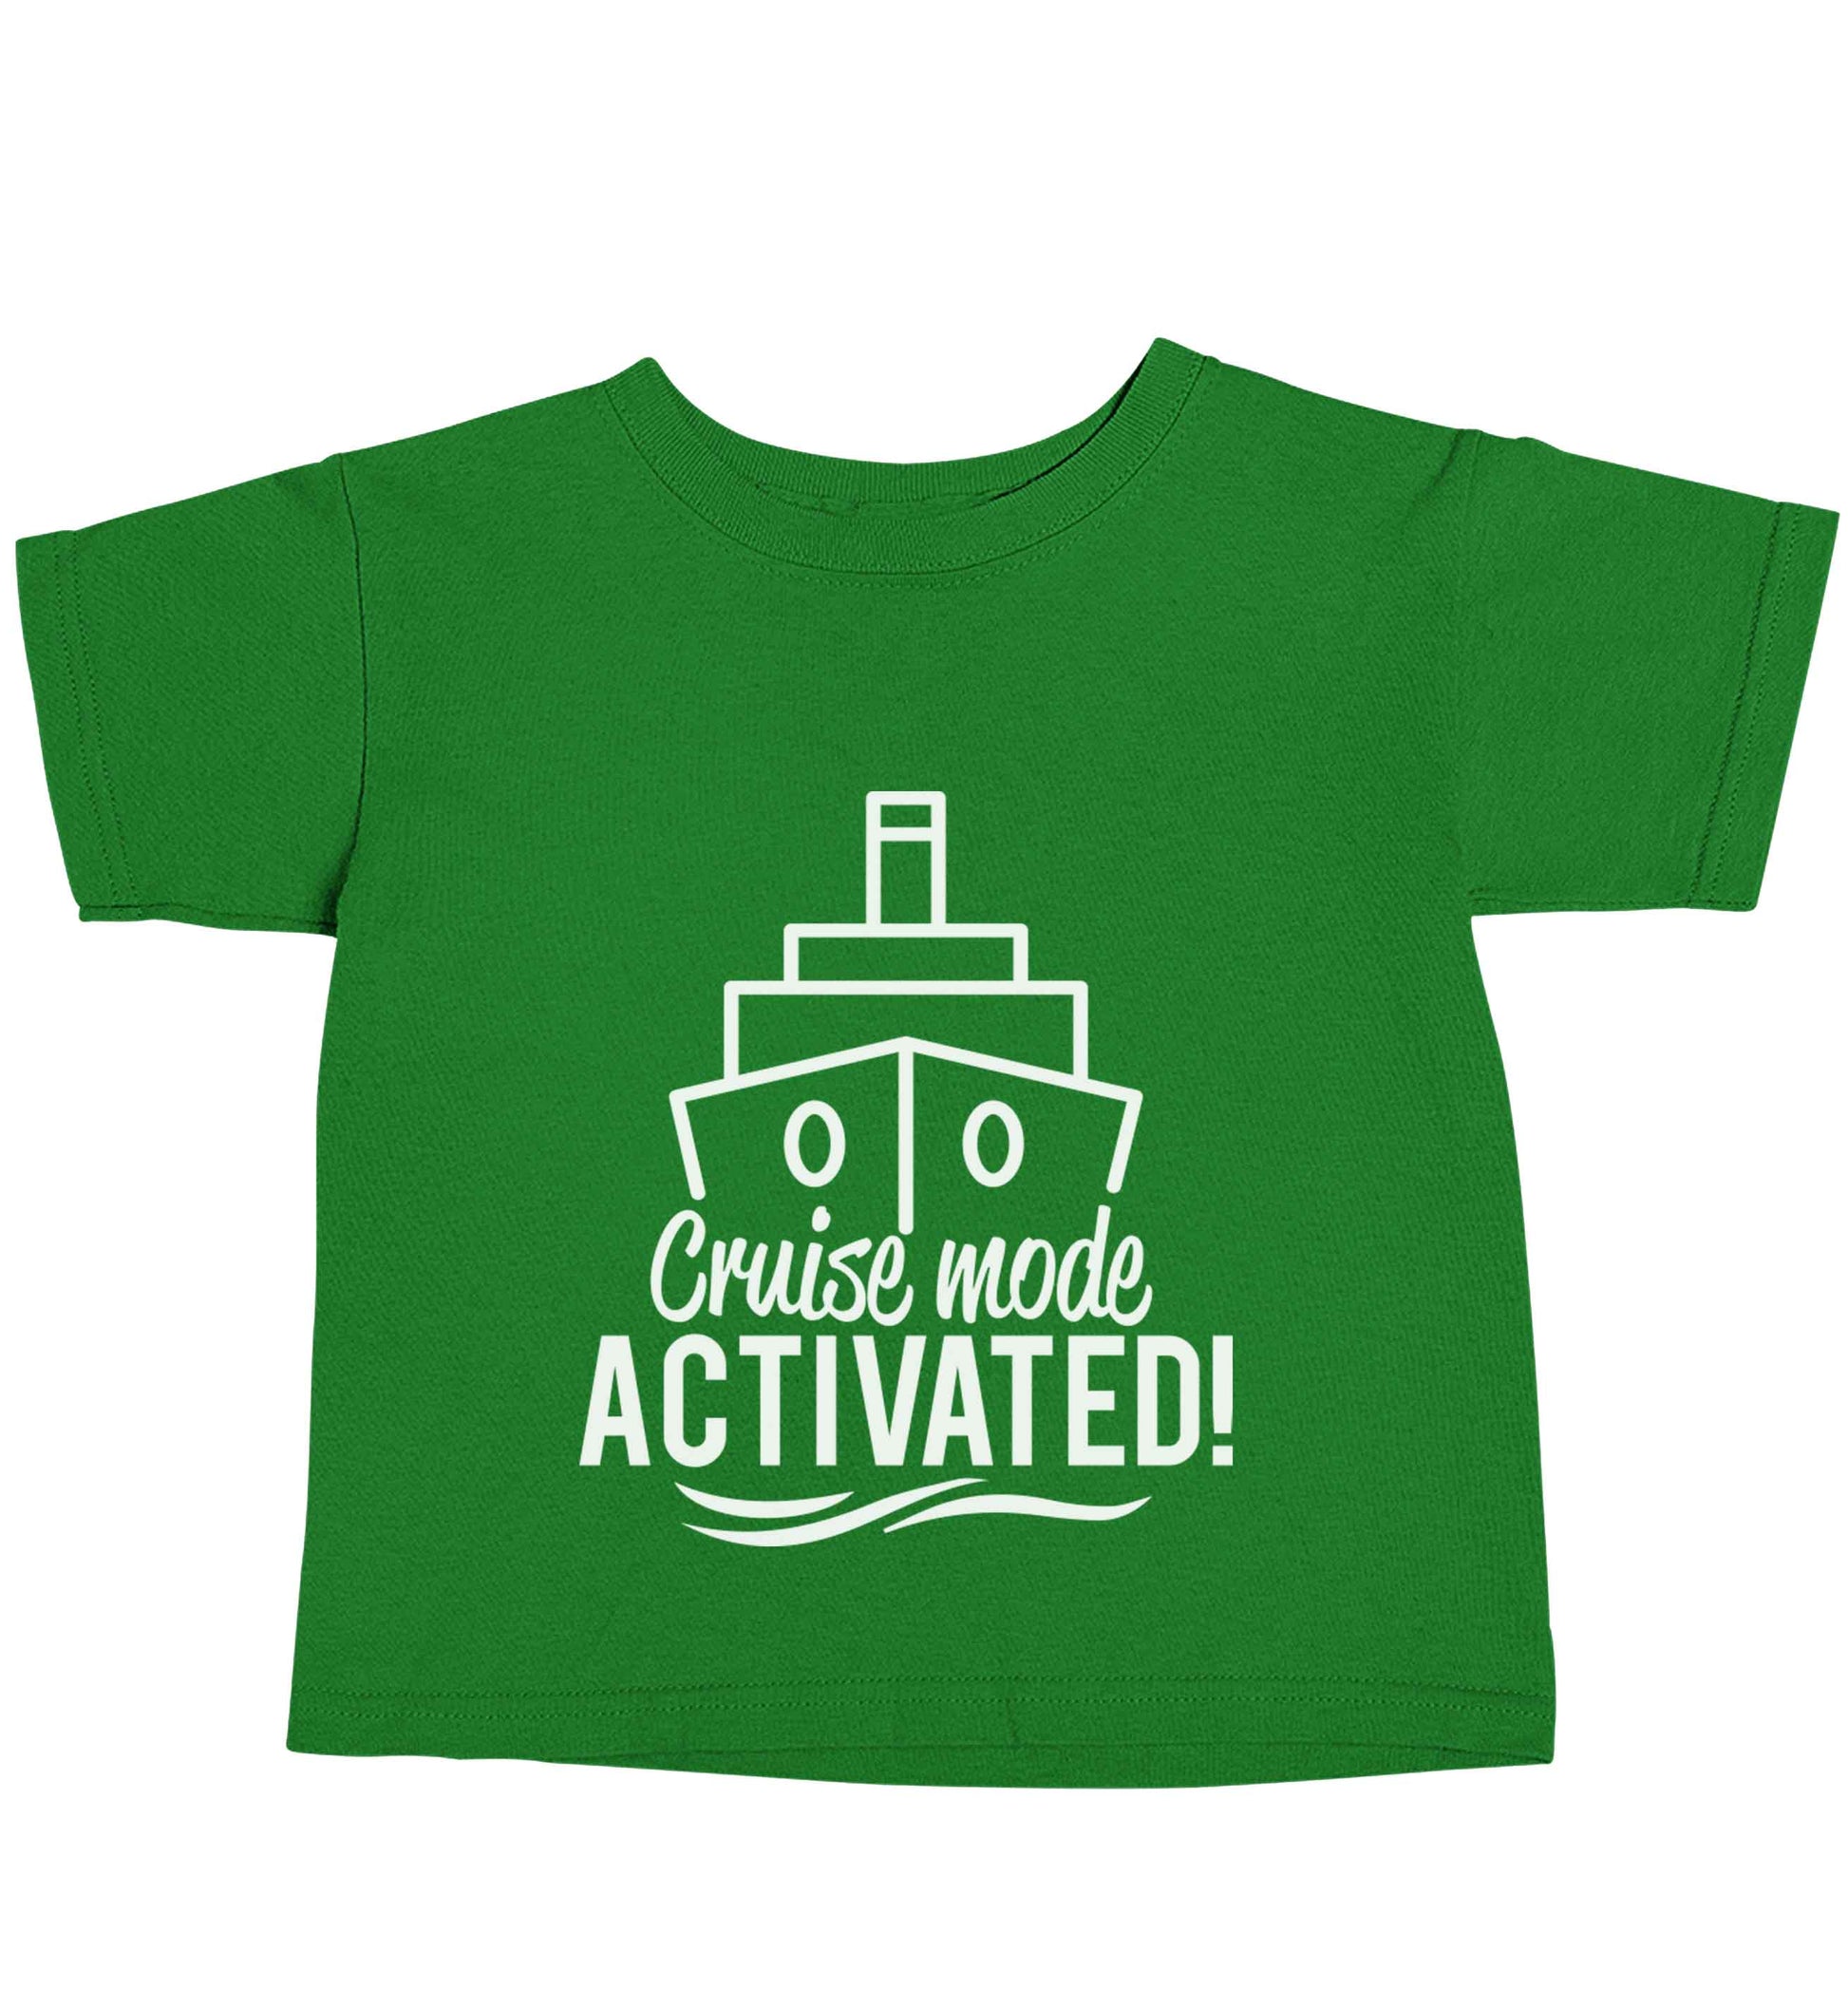 Cruise mode activated green baby toddler Tshirt 2 Years